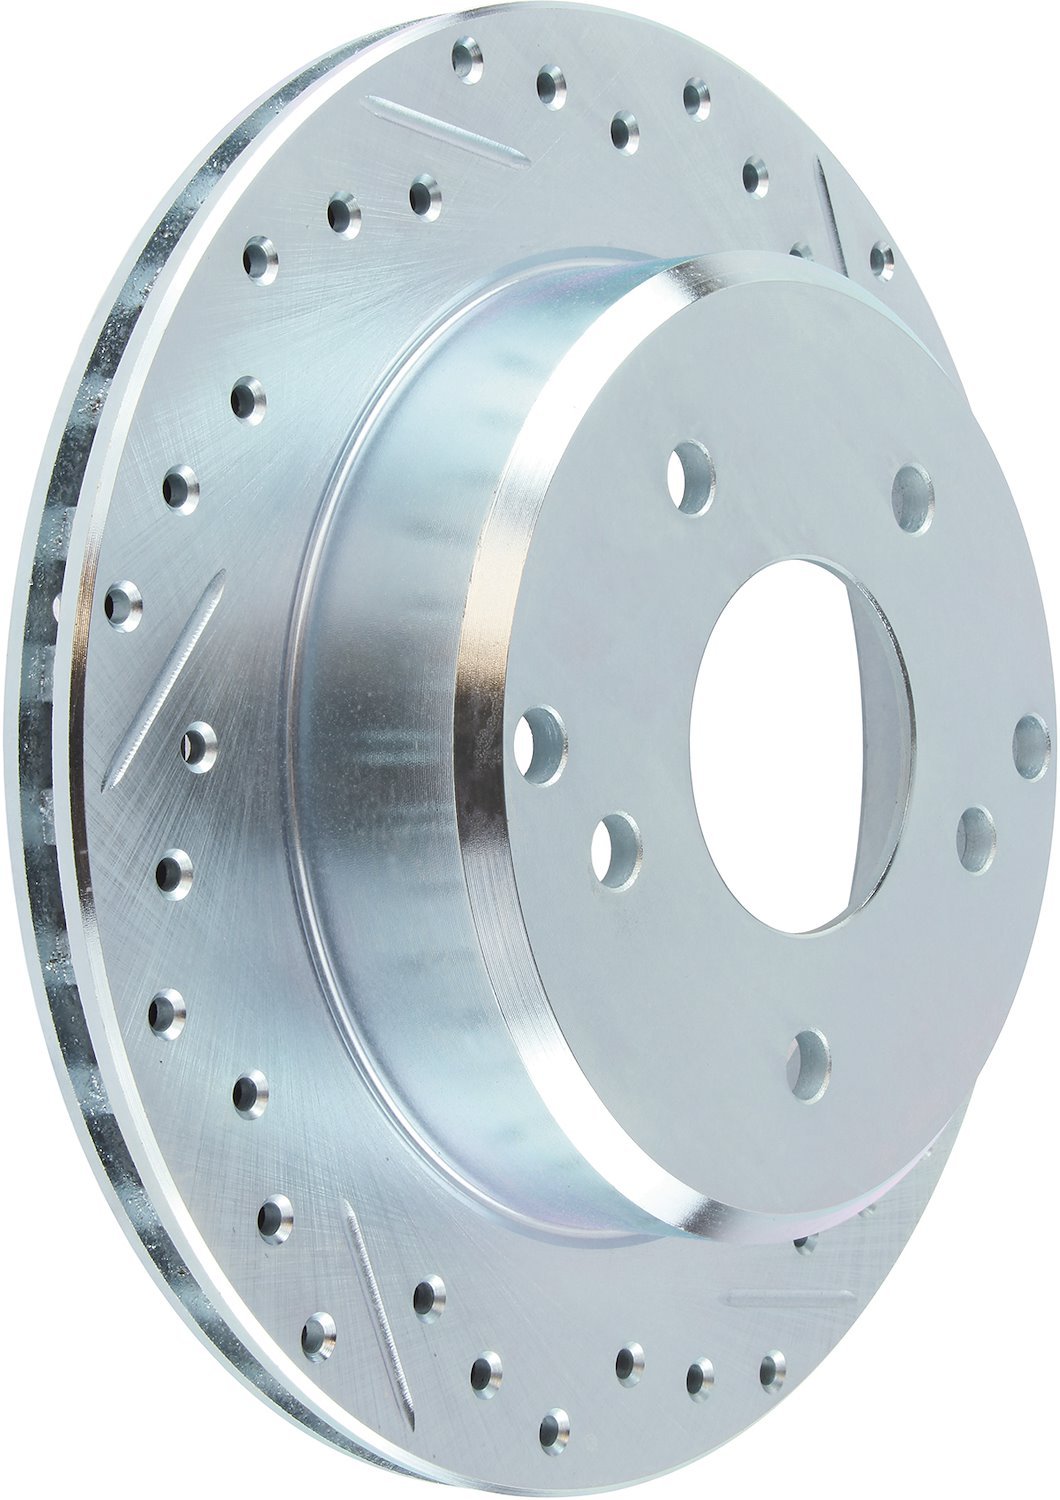 Select Sport Drilled and Slotted Front Brake Rotor Fits Select Late Model Lexus, Pontiac, Scion, Toyota Models